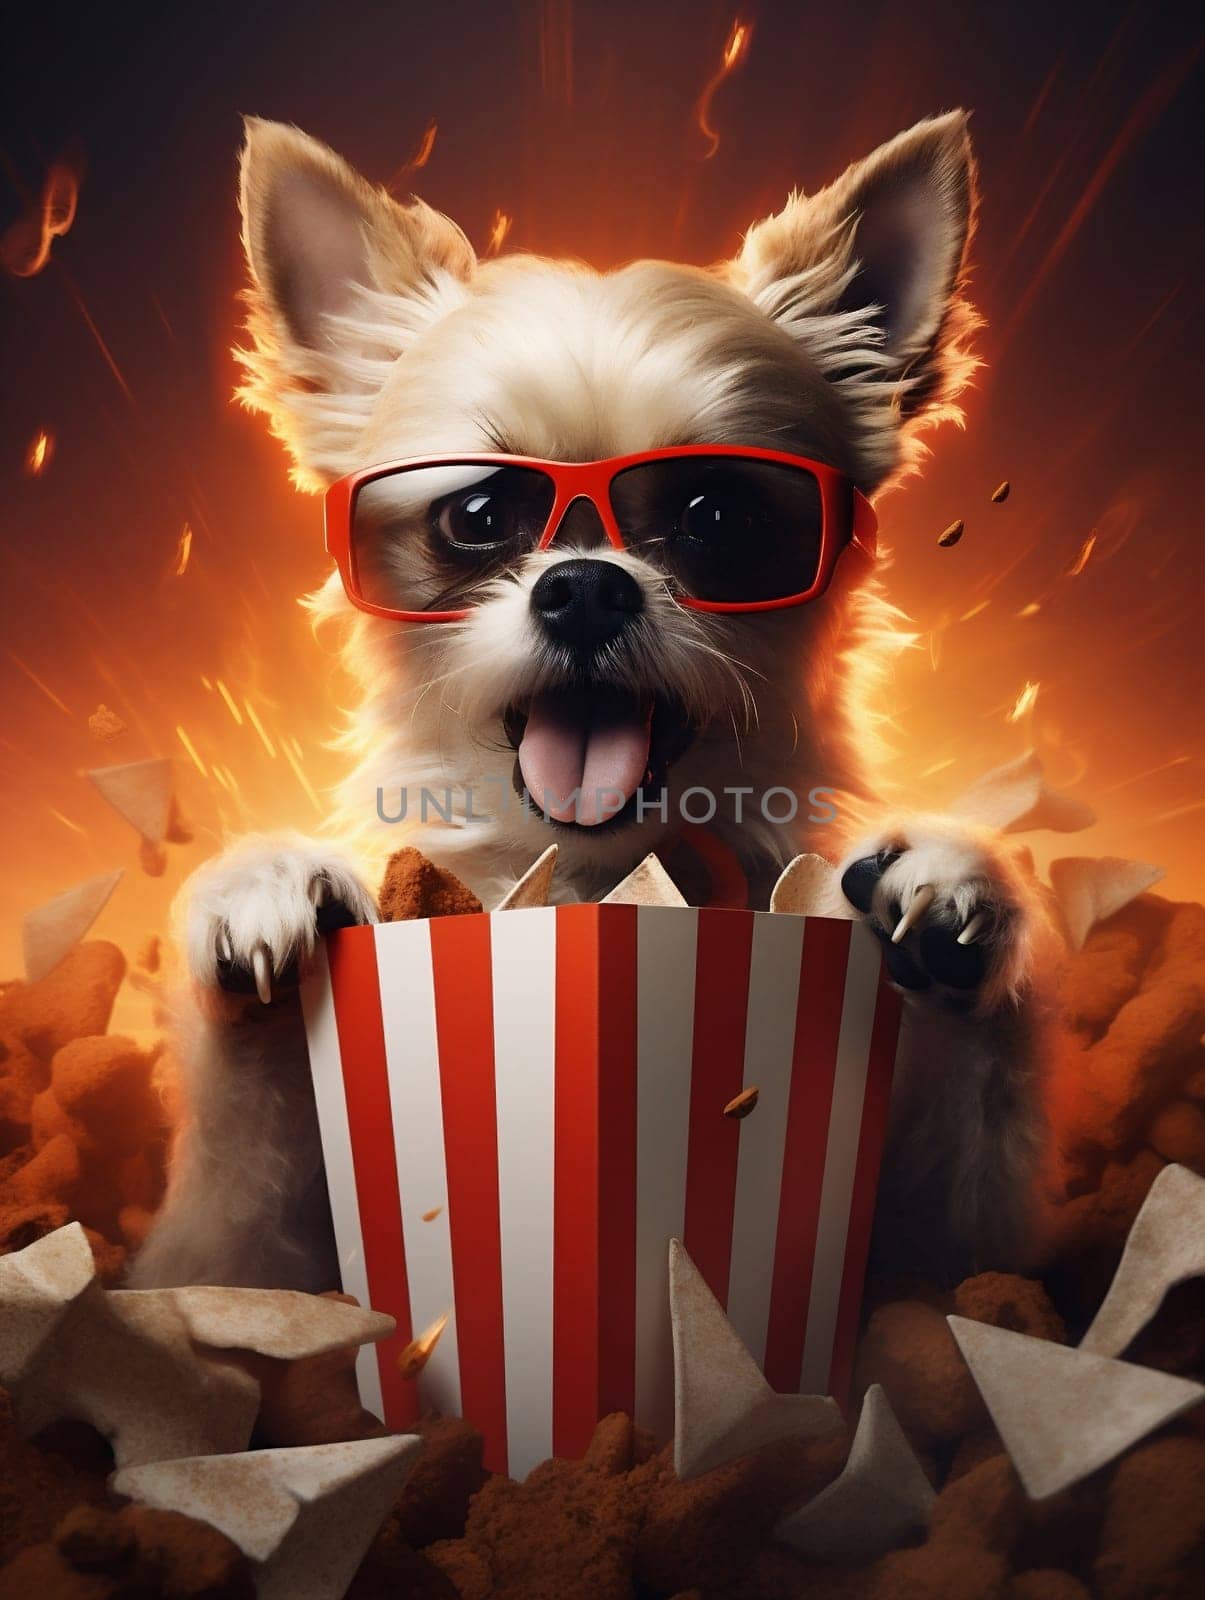 Dog puppy russell humor fun pets white holiday leisure canine jack vacation red animal terrier funny glasses summer cute chair background sunglasses